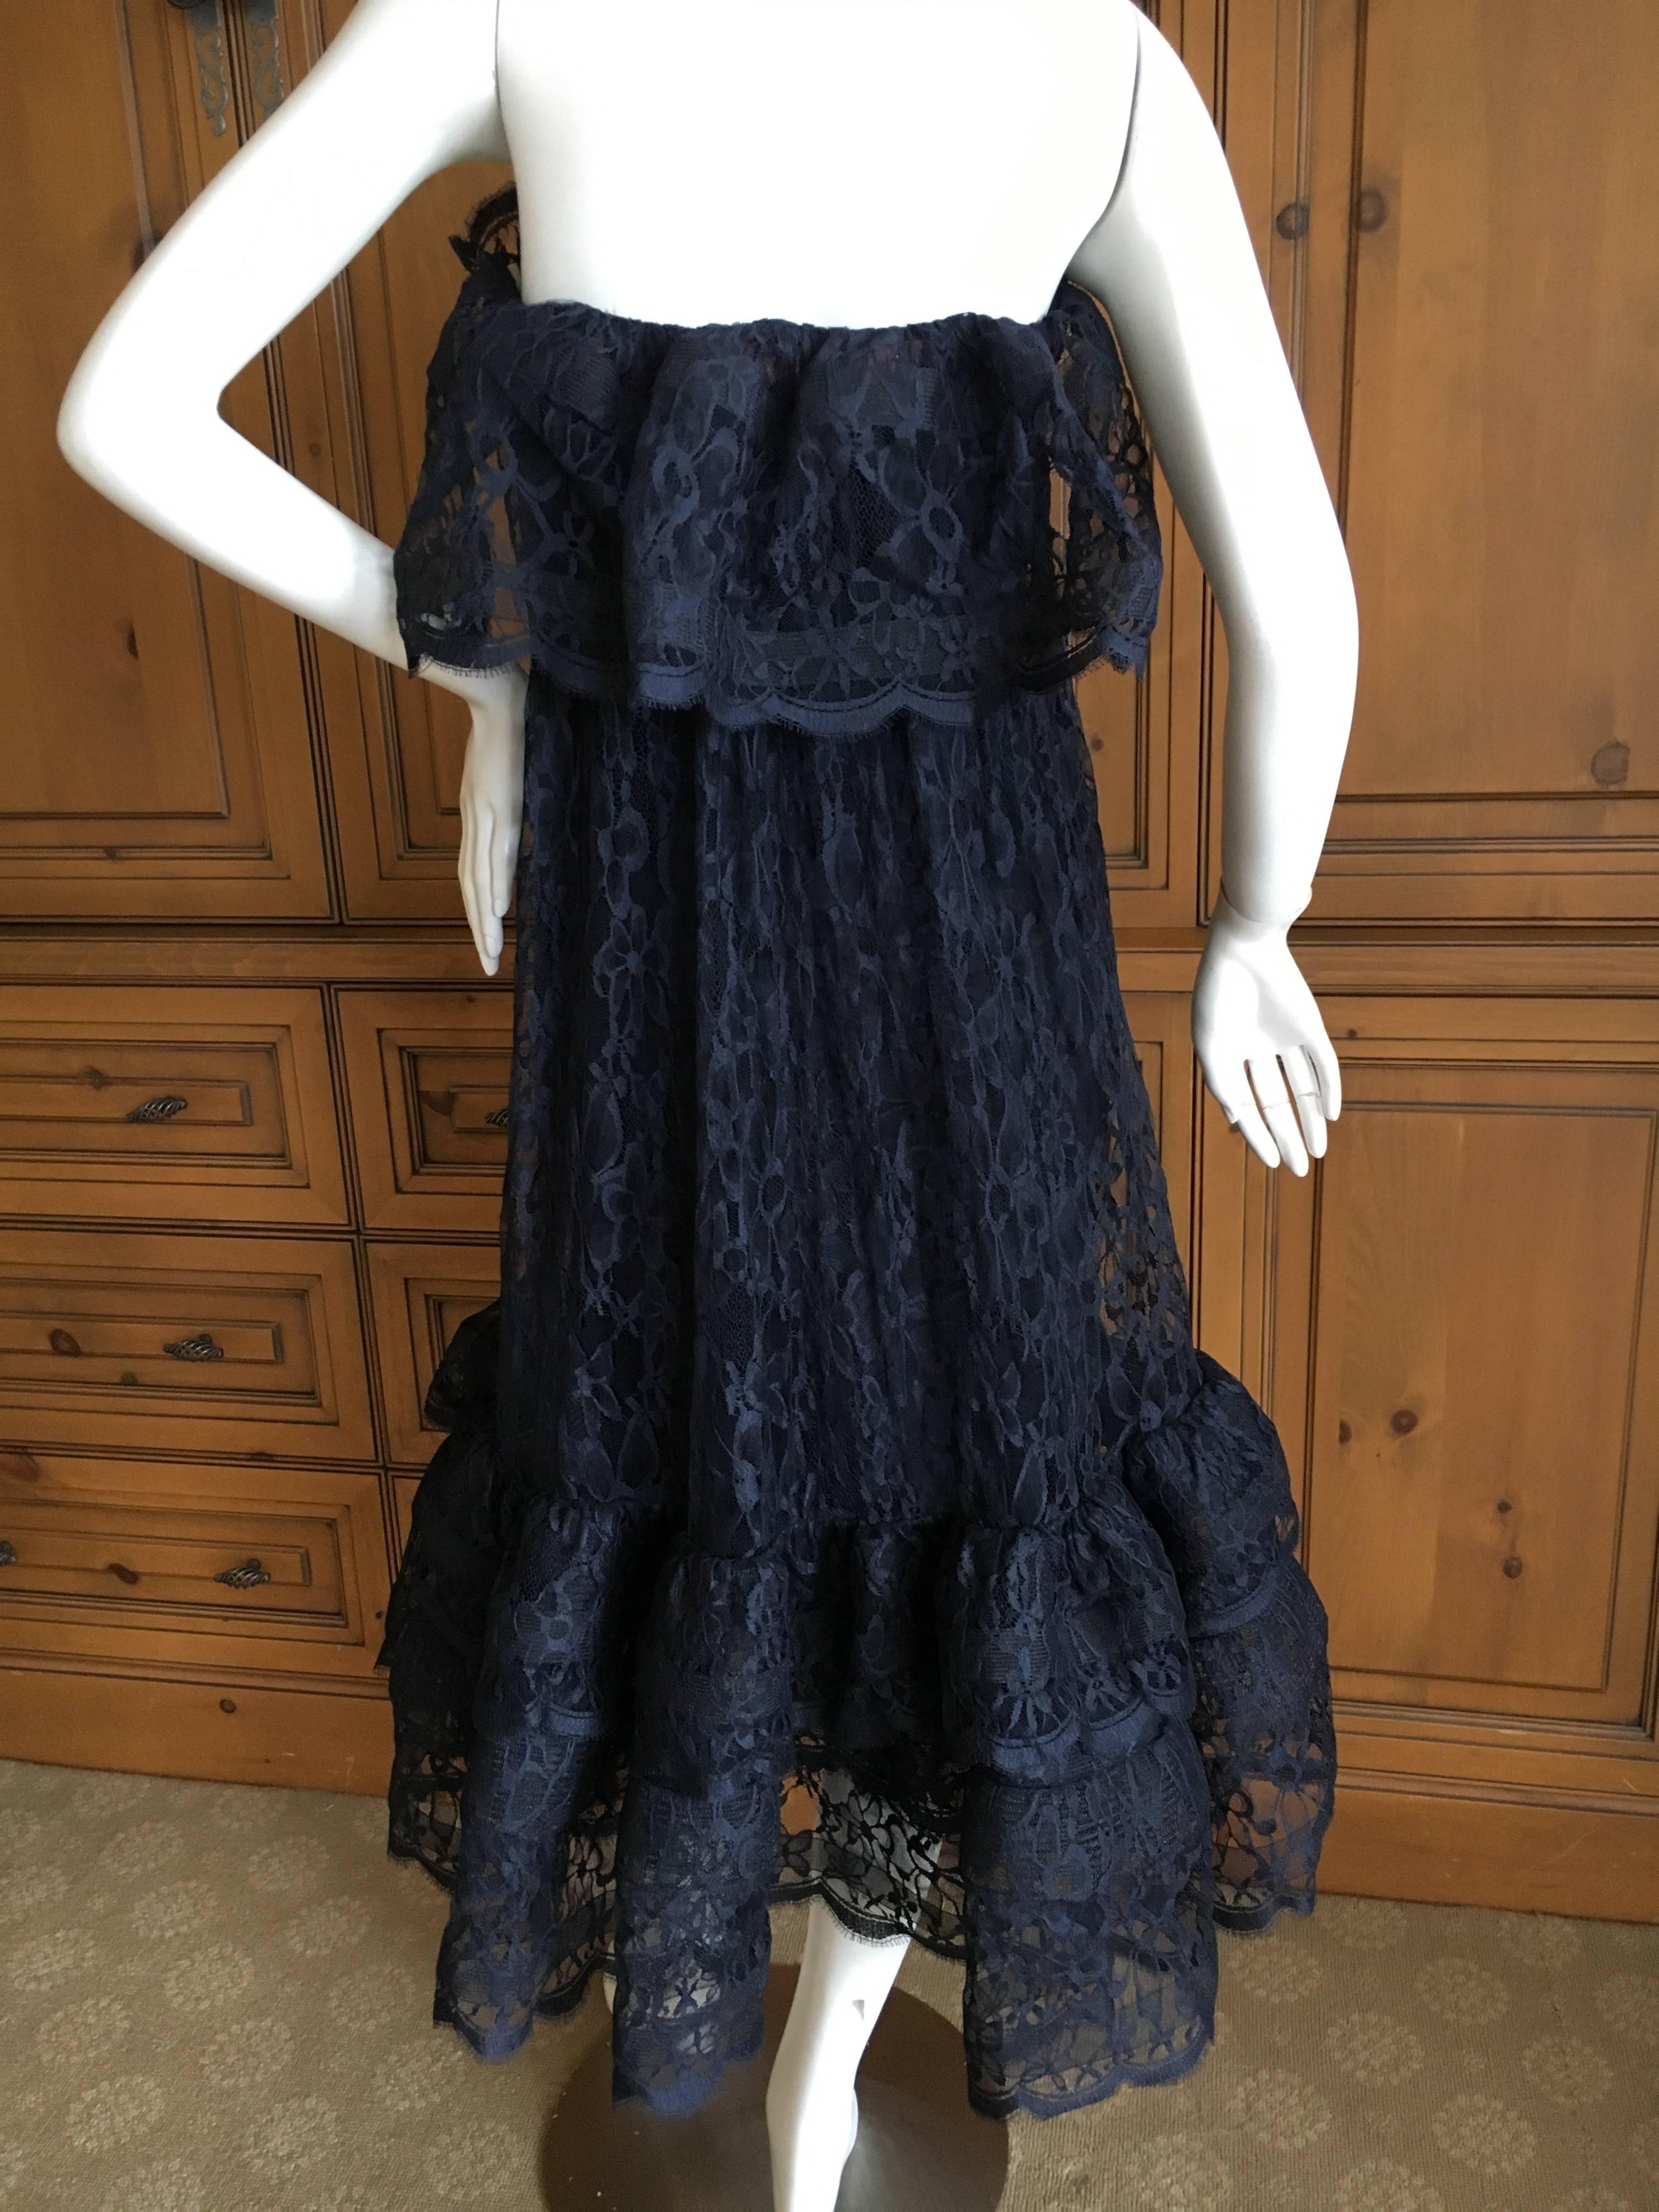 Women's Balenciaga Edition Navy Blue Lace Evening Dress New $7295 Barneys Tags For Sale